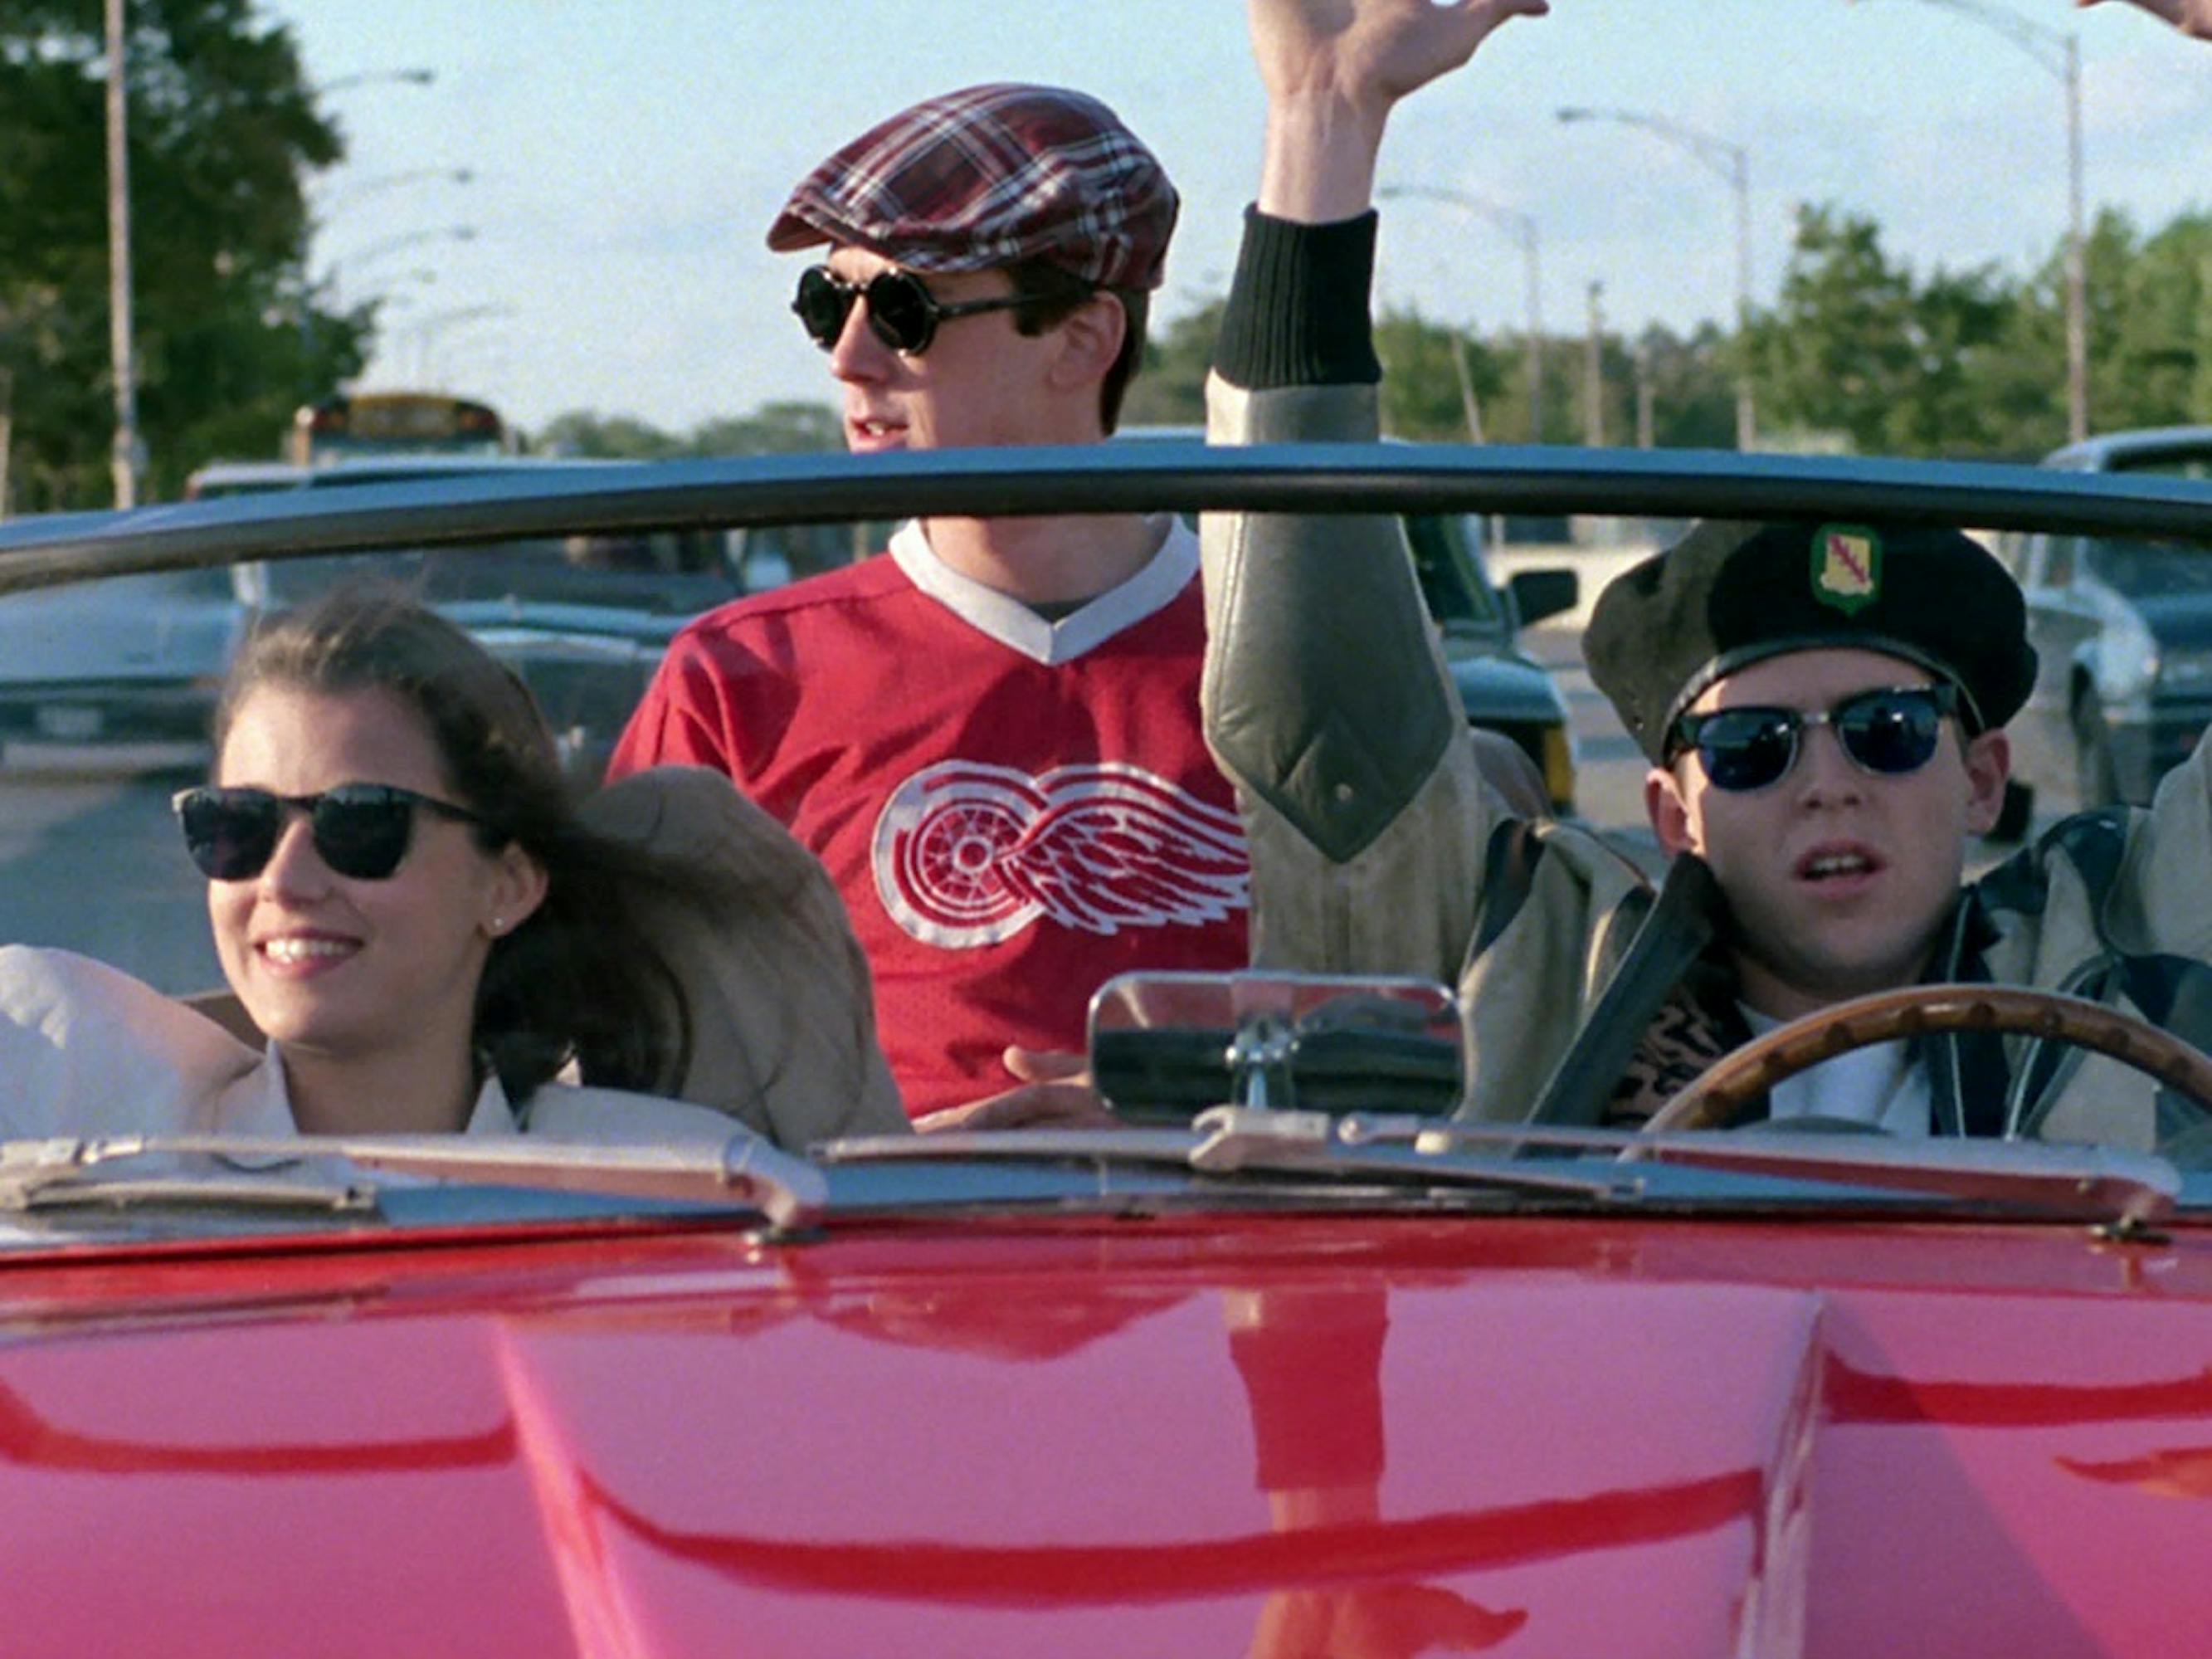 Sloane Peterson (Mia Sara), Cameron Frye (Alan Ruck), and Ferris Bueller (Matthew Broderick) in a red convertible.